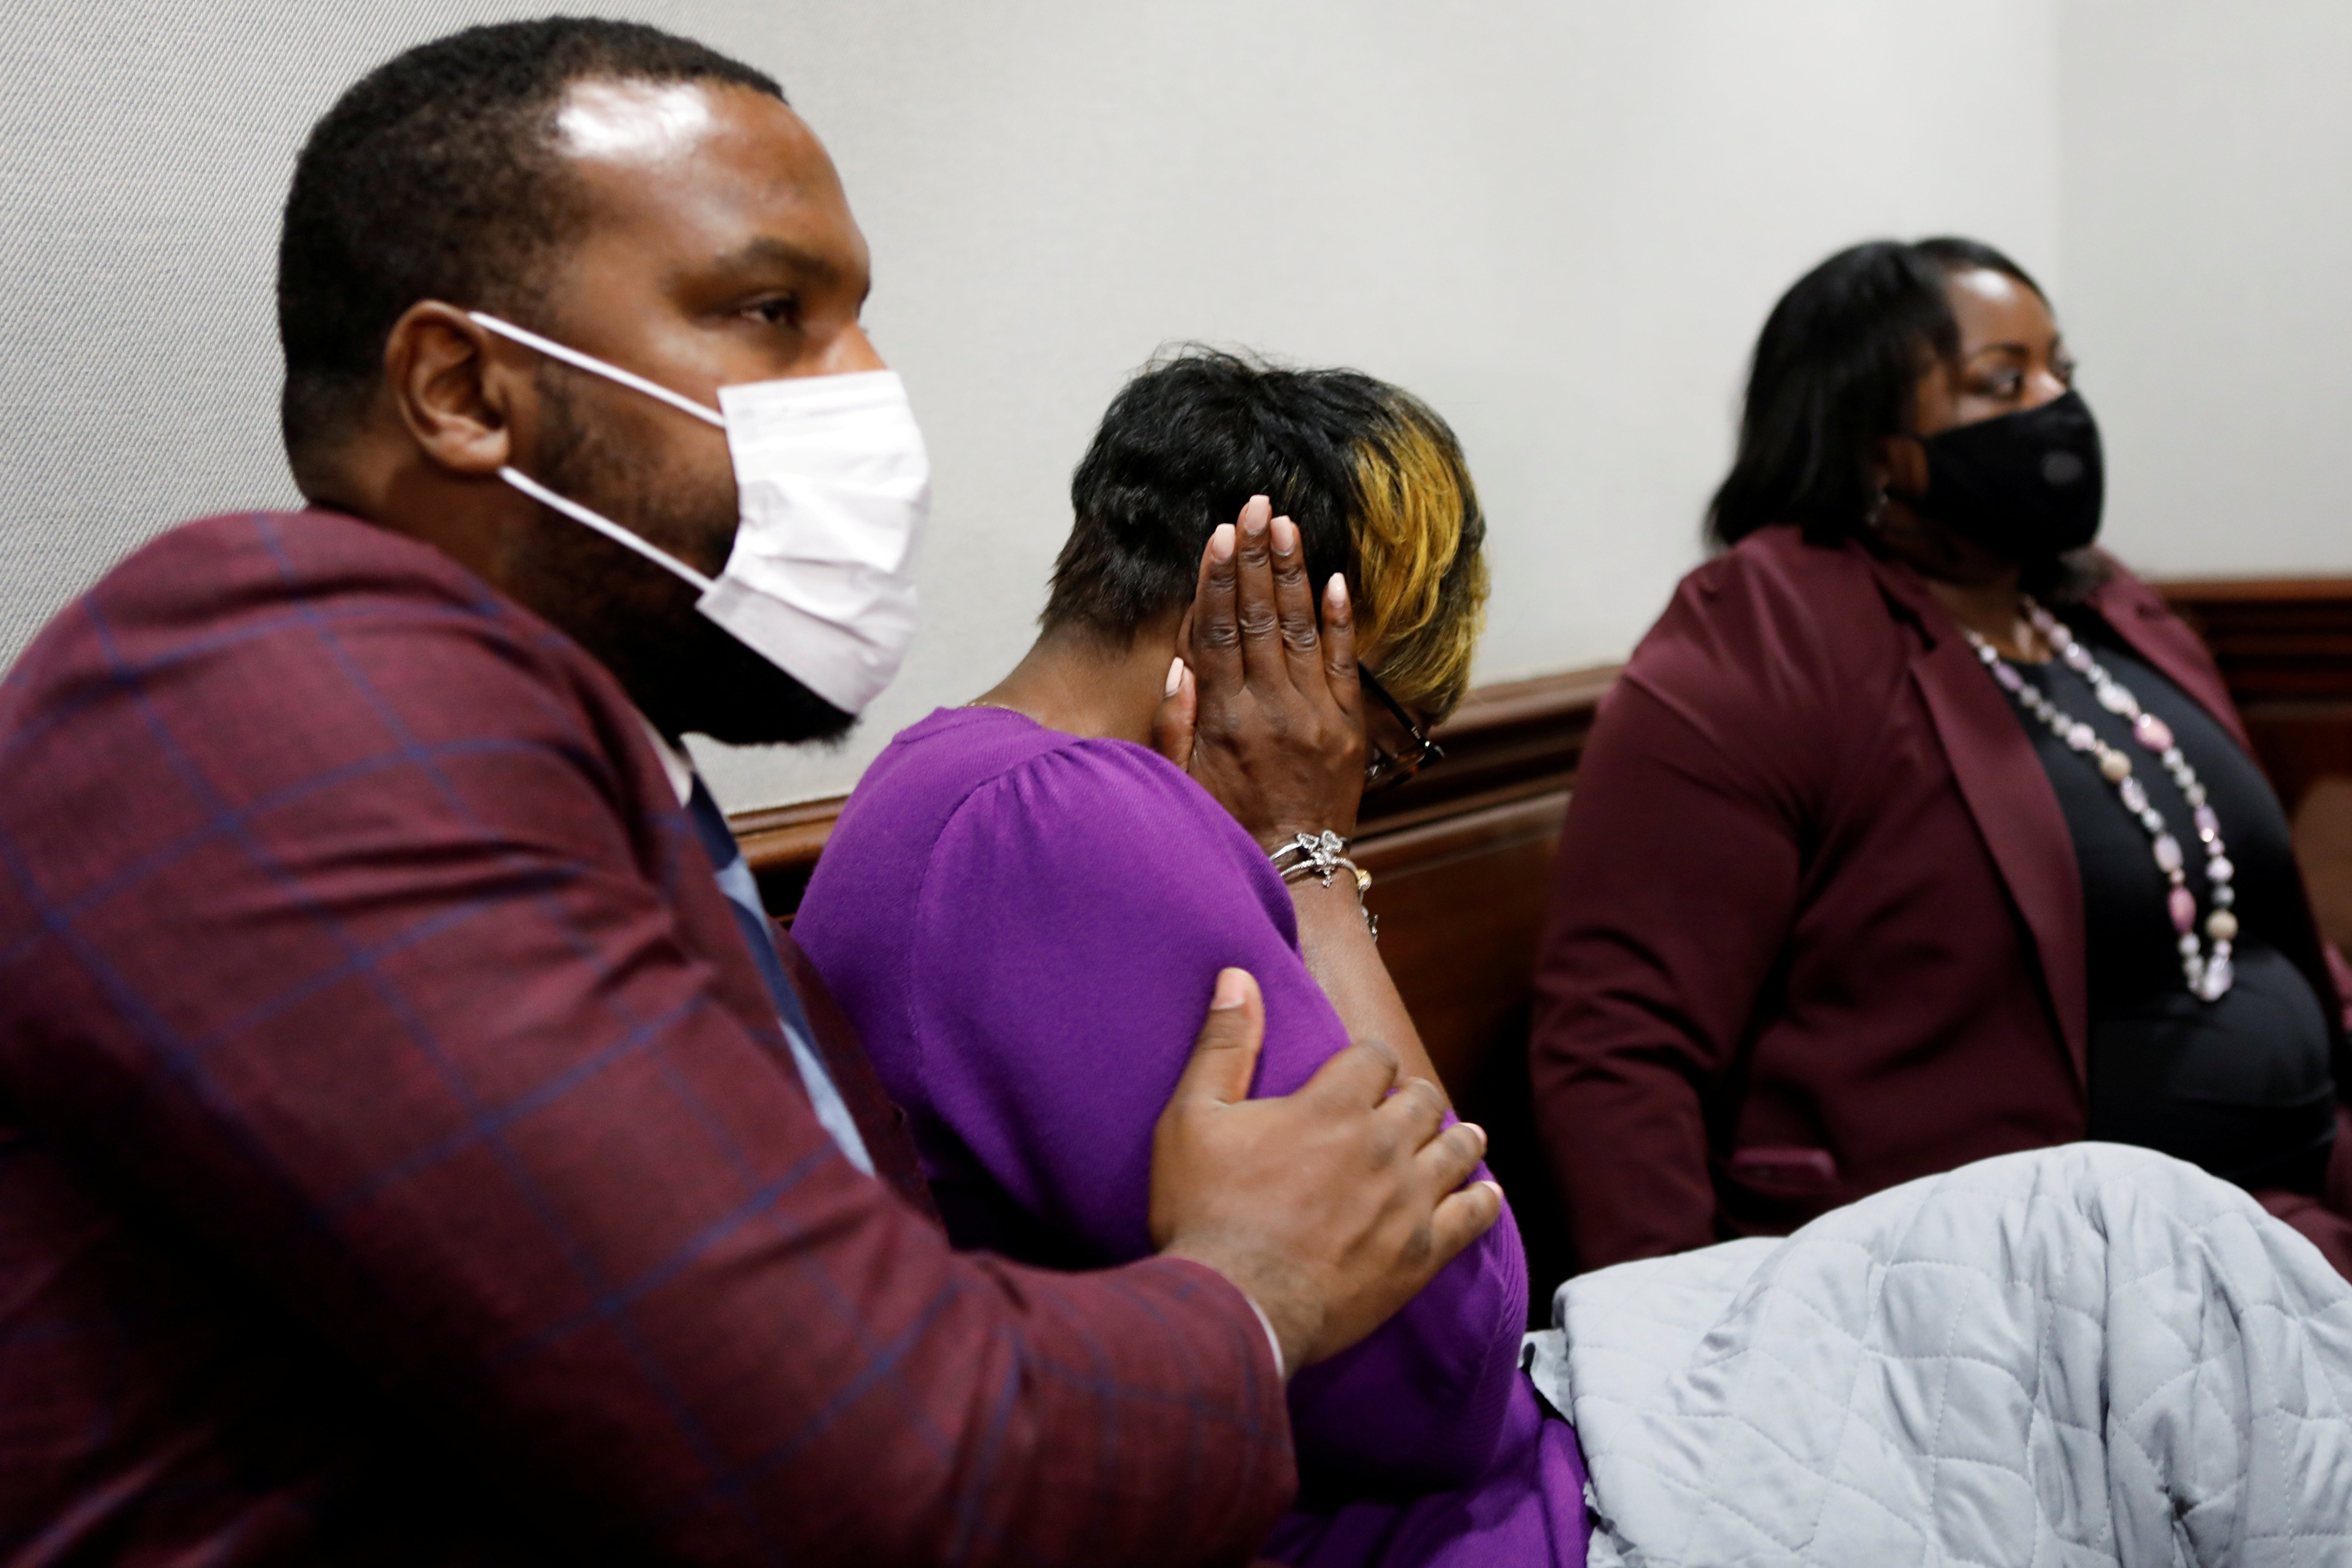 Lee Merritt comforts Wanda Cooper-Jones, mother of Ahmaud Arbery, as she reacts while seeing photos of her son shown at his killers’ state trial